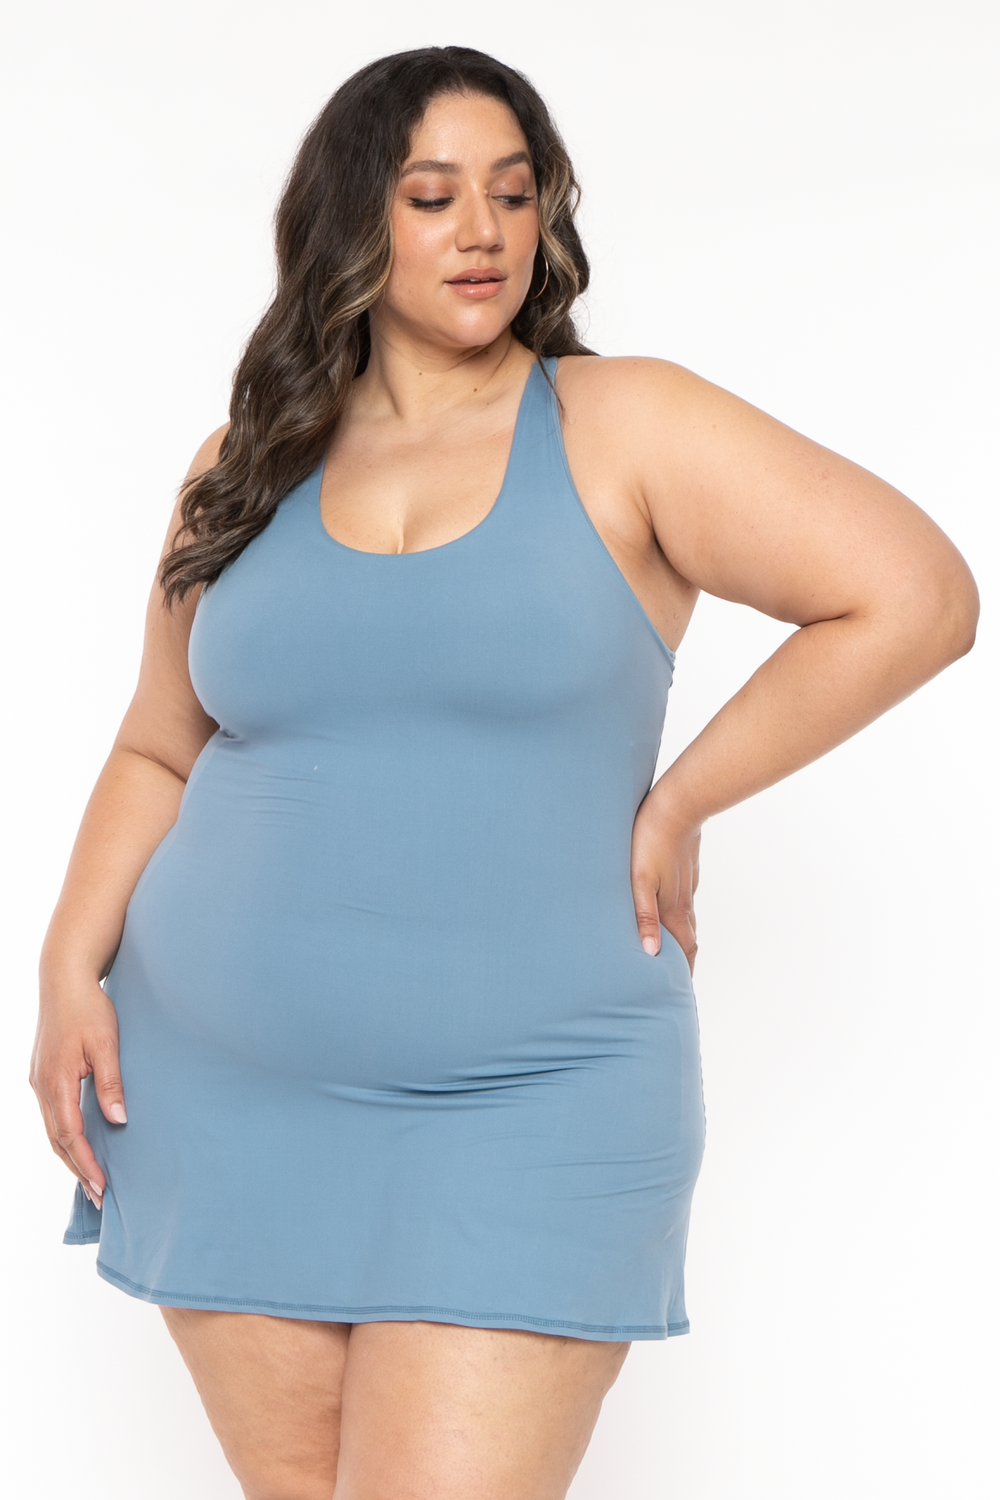 RAE MODE ACTIVEWEAR 1X / Periwinkle Plus Size Lizzy  Active Romper Dress  - Periwinkle